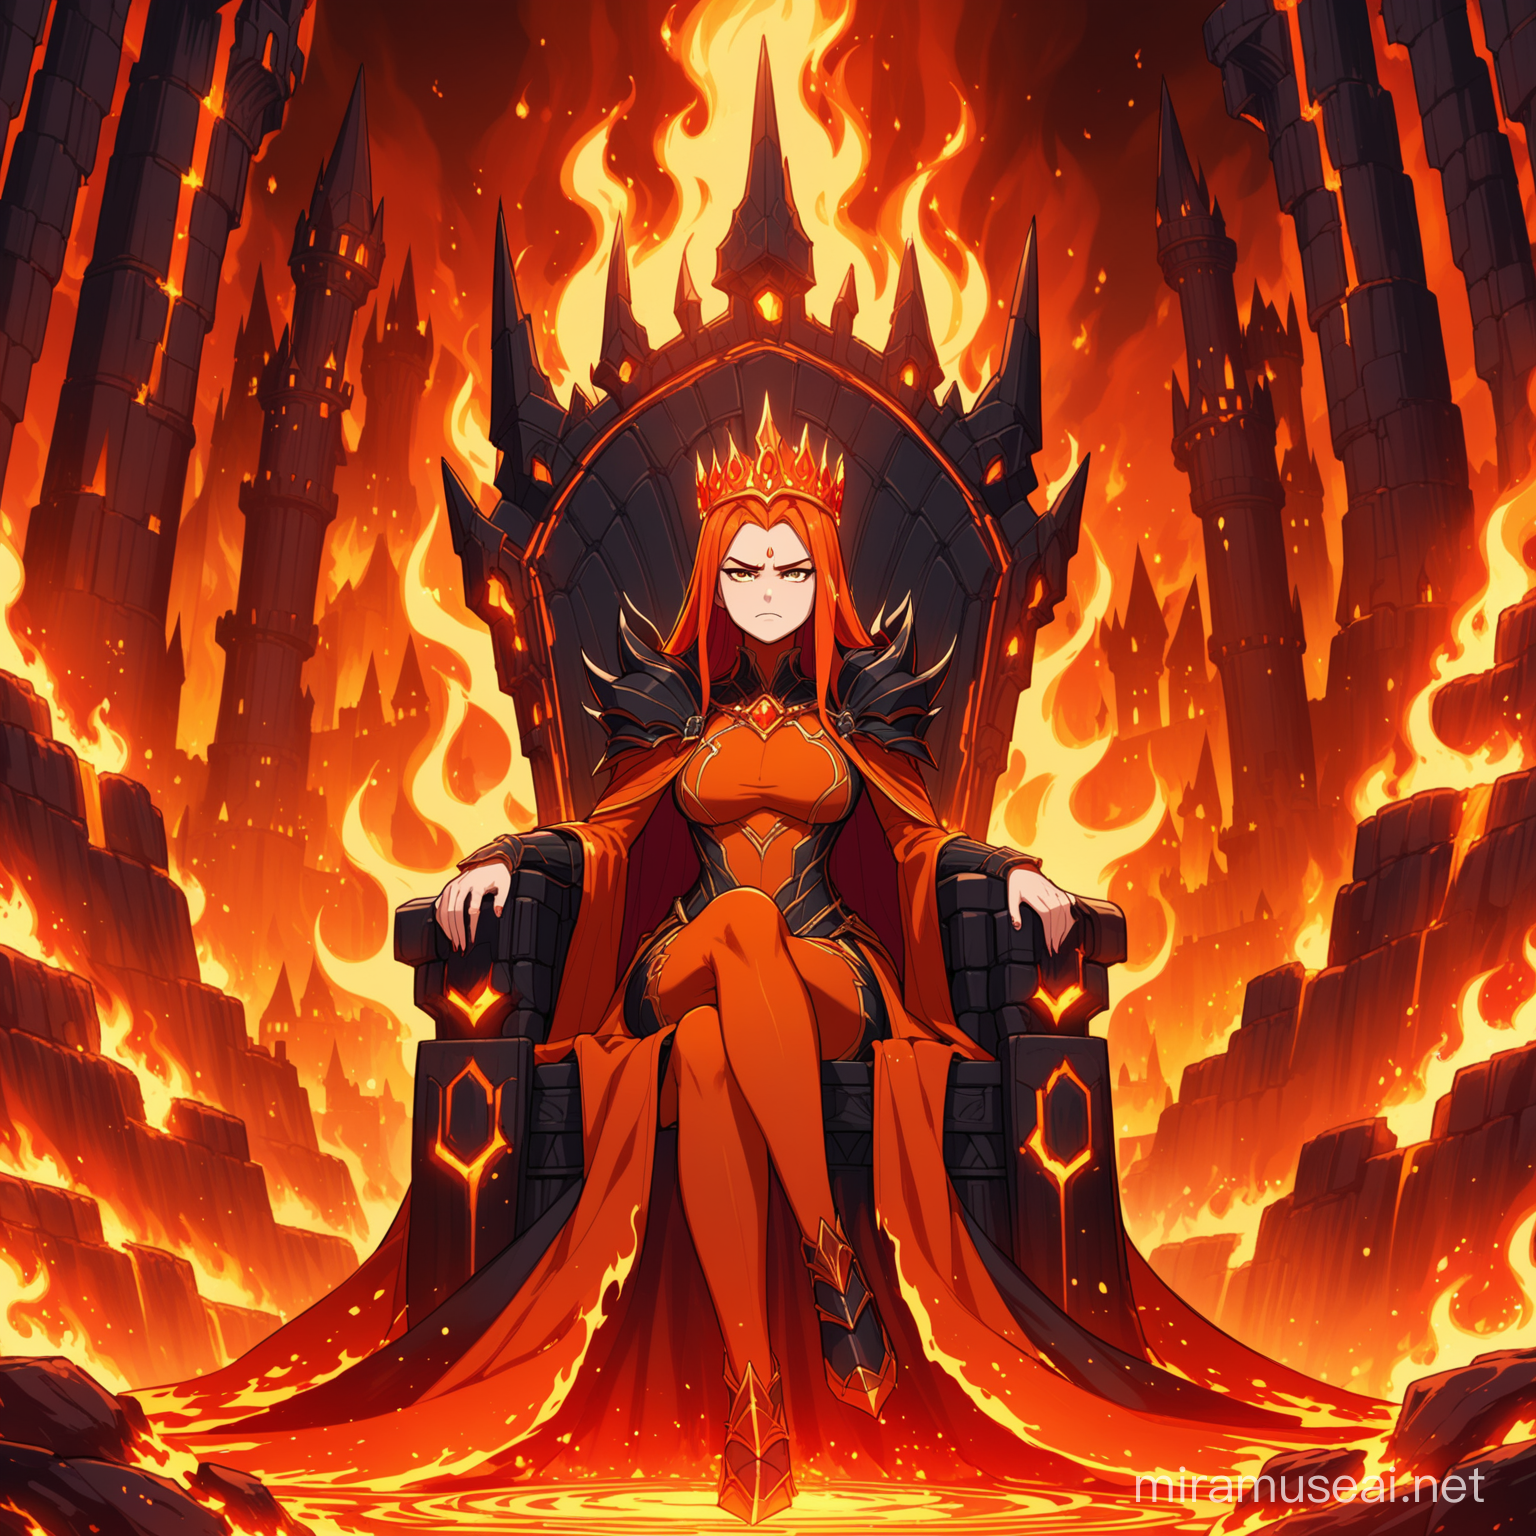 Lava Queens Fiery Reign A Portrait of Boredom Amidst Flames